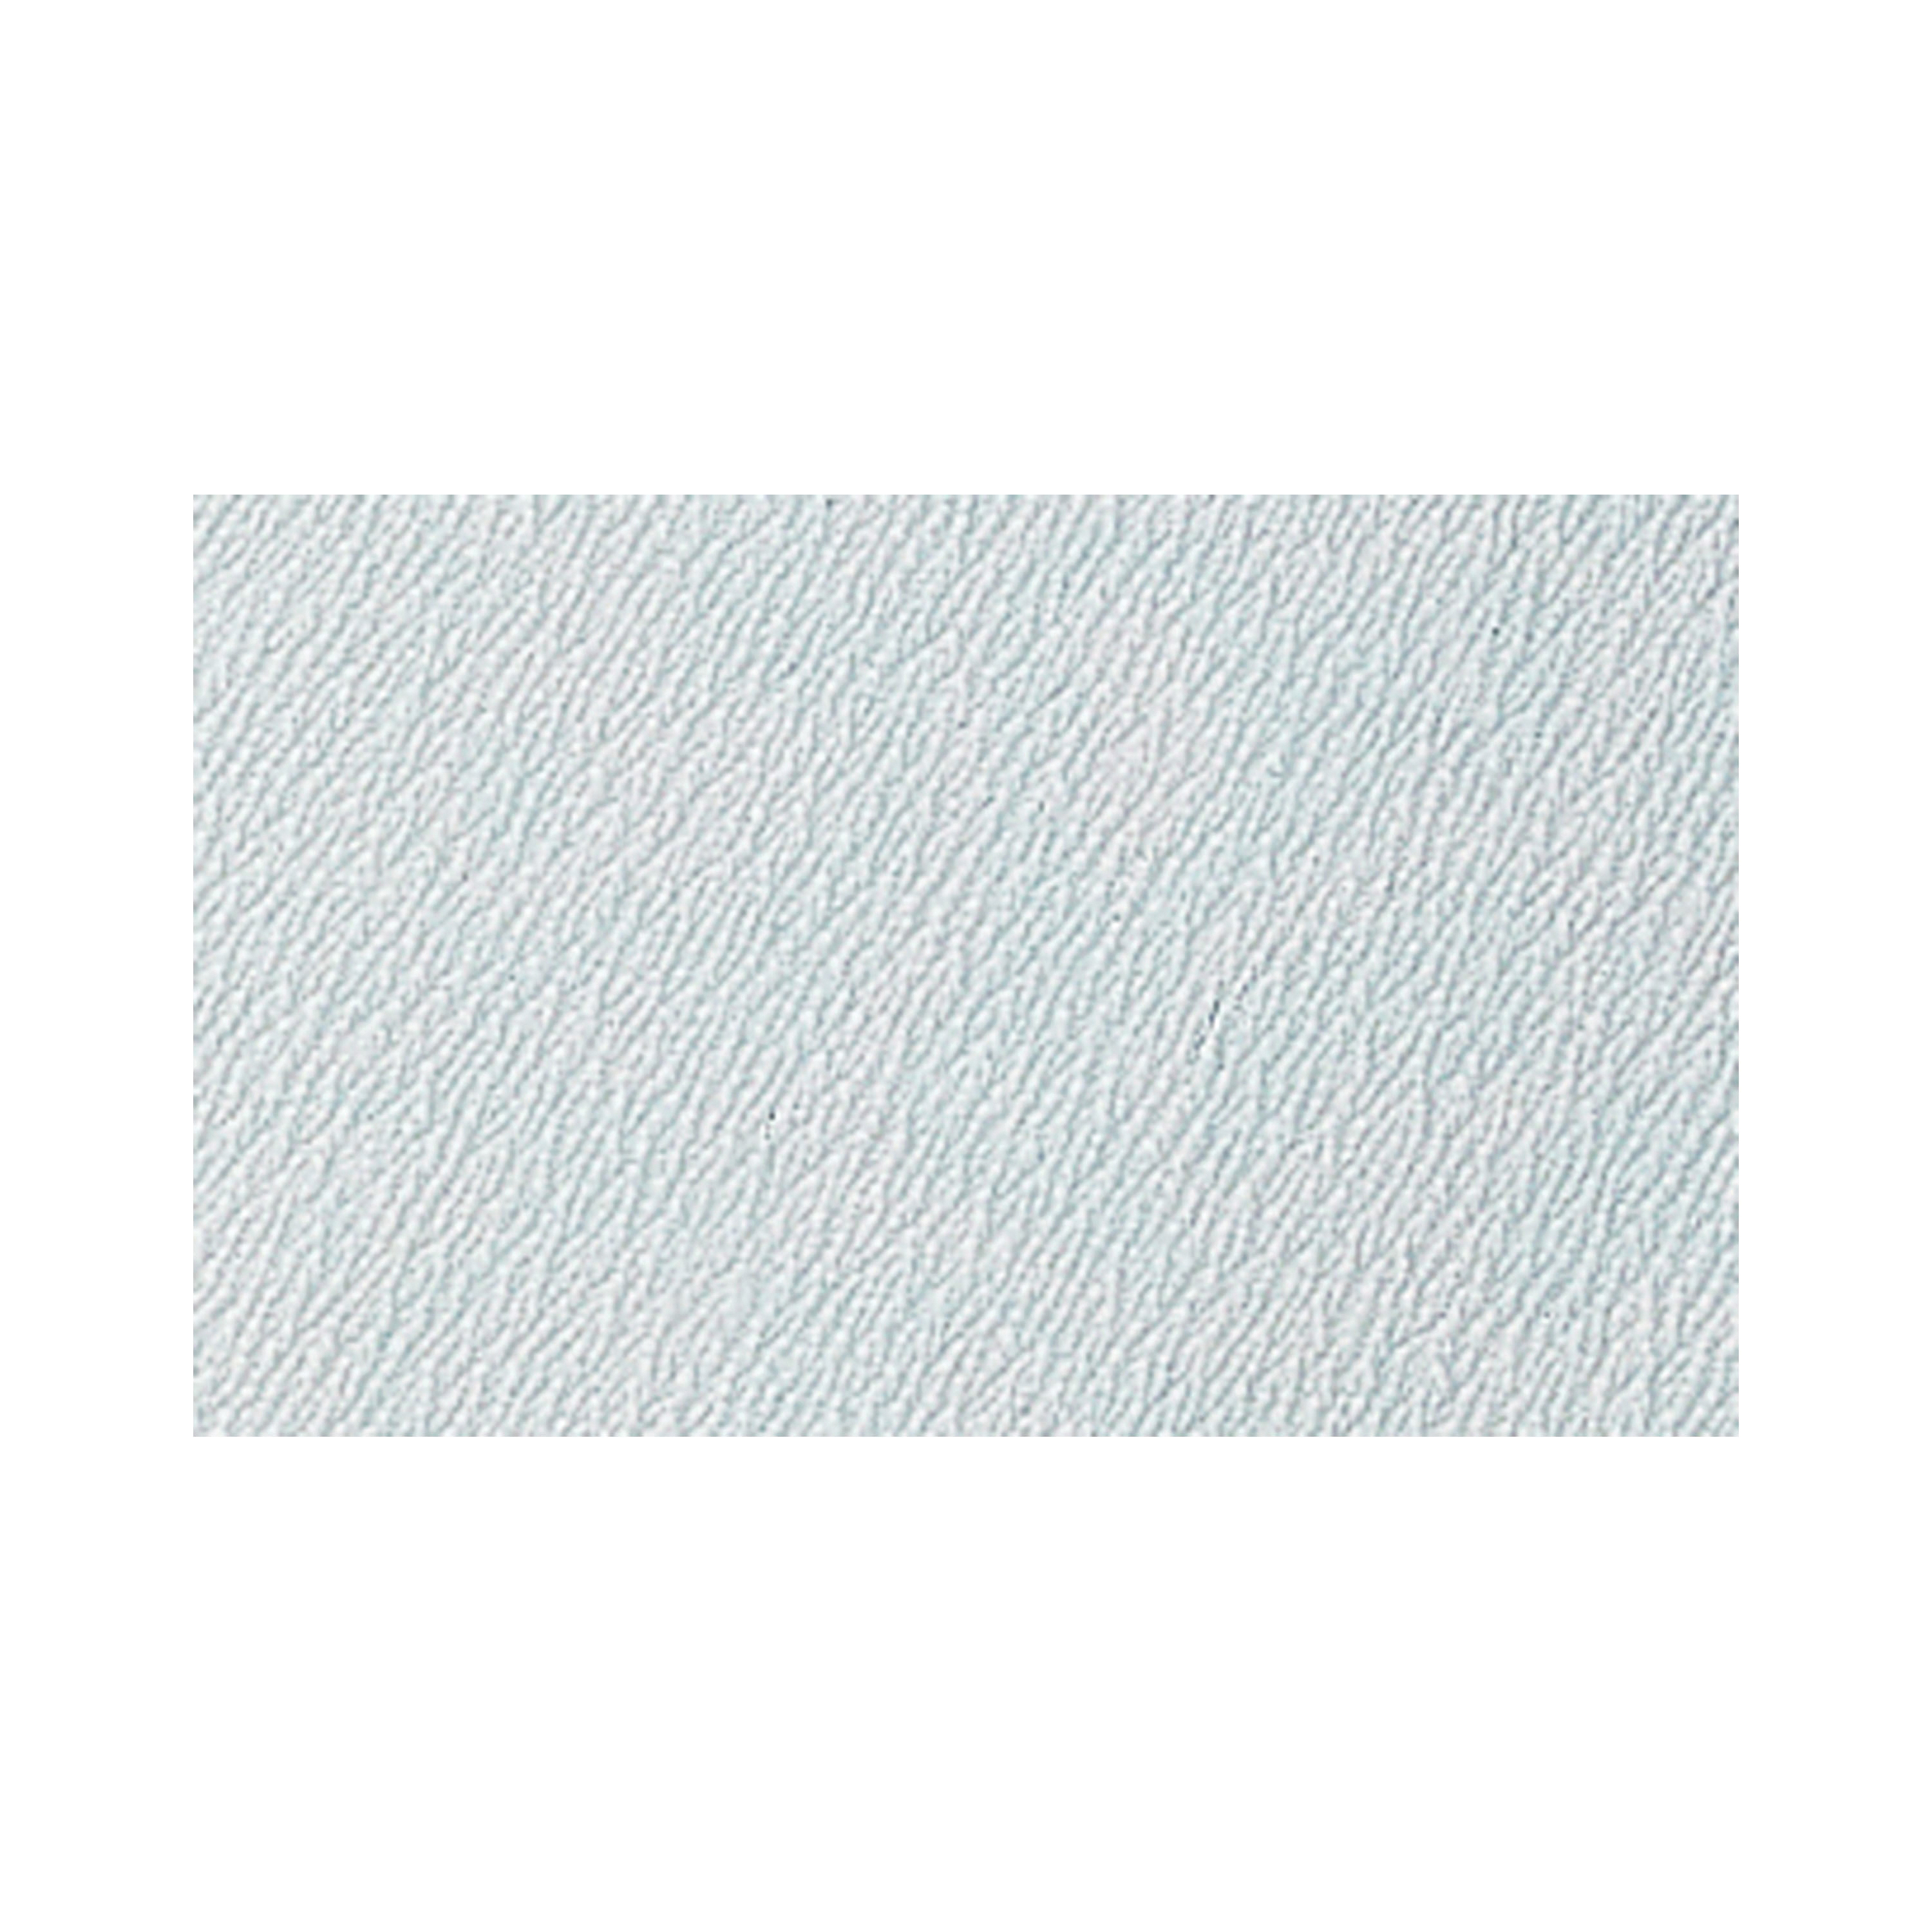 3M™ 051144-02356 435U Coated Sanding Sheet, 11 in L x 9 in W, 100 Grit, Fine Grade, Silicon Carbide Abrasive, Paper Backing